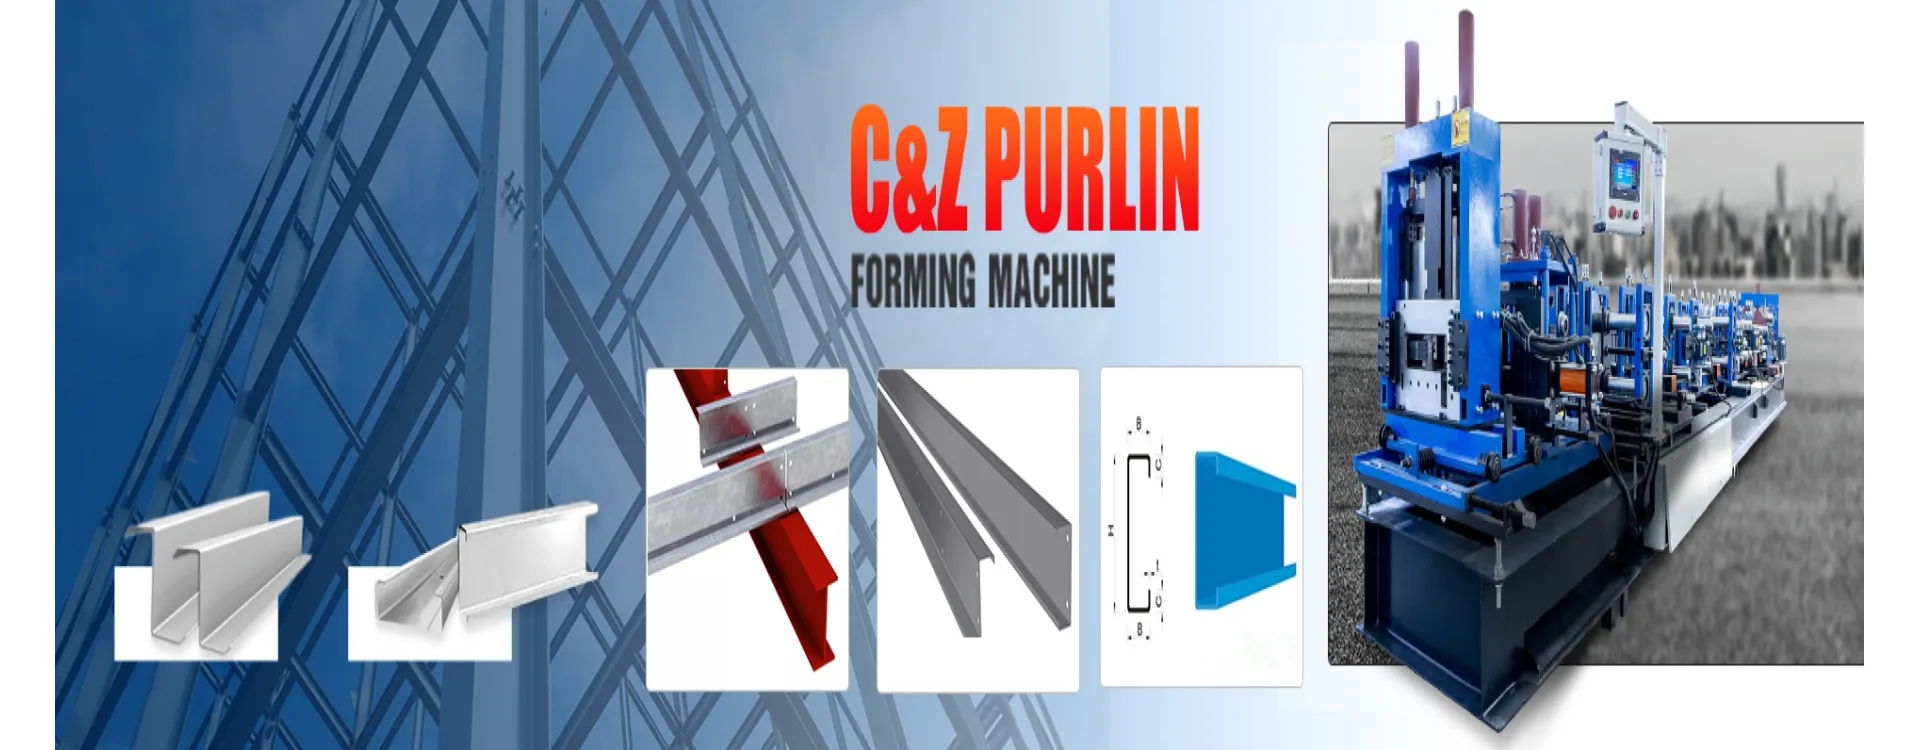 Xinnuo roll forming professional C&Z purlin making machine manufacturer